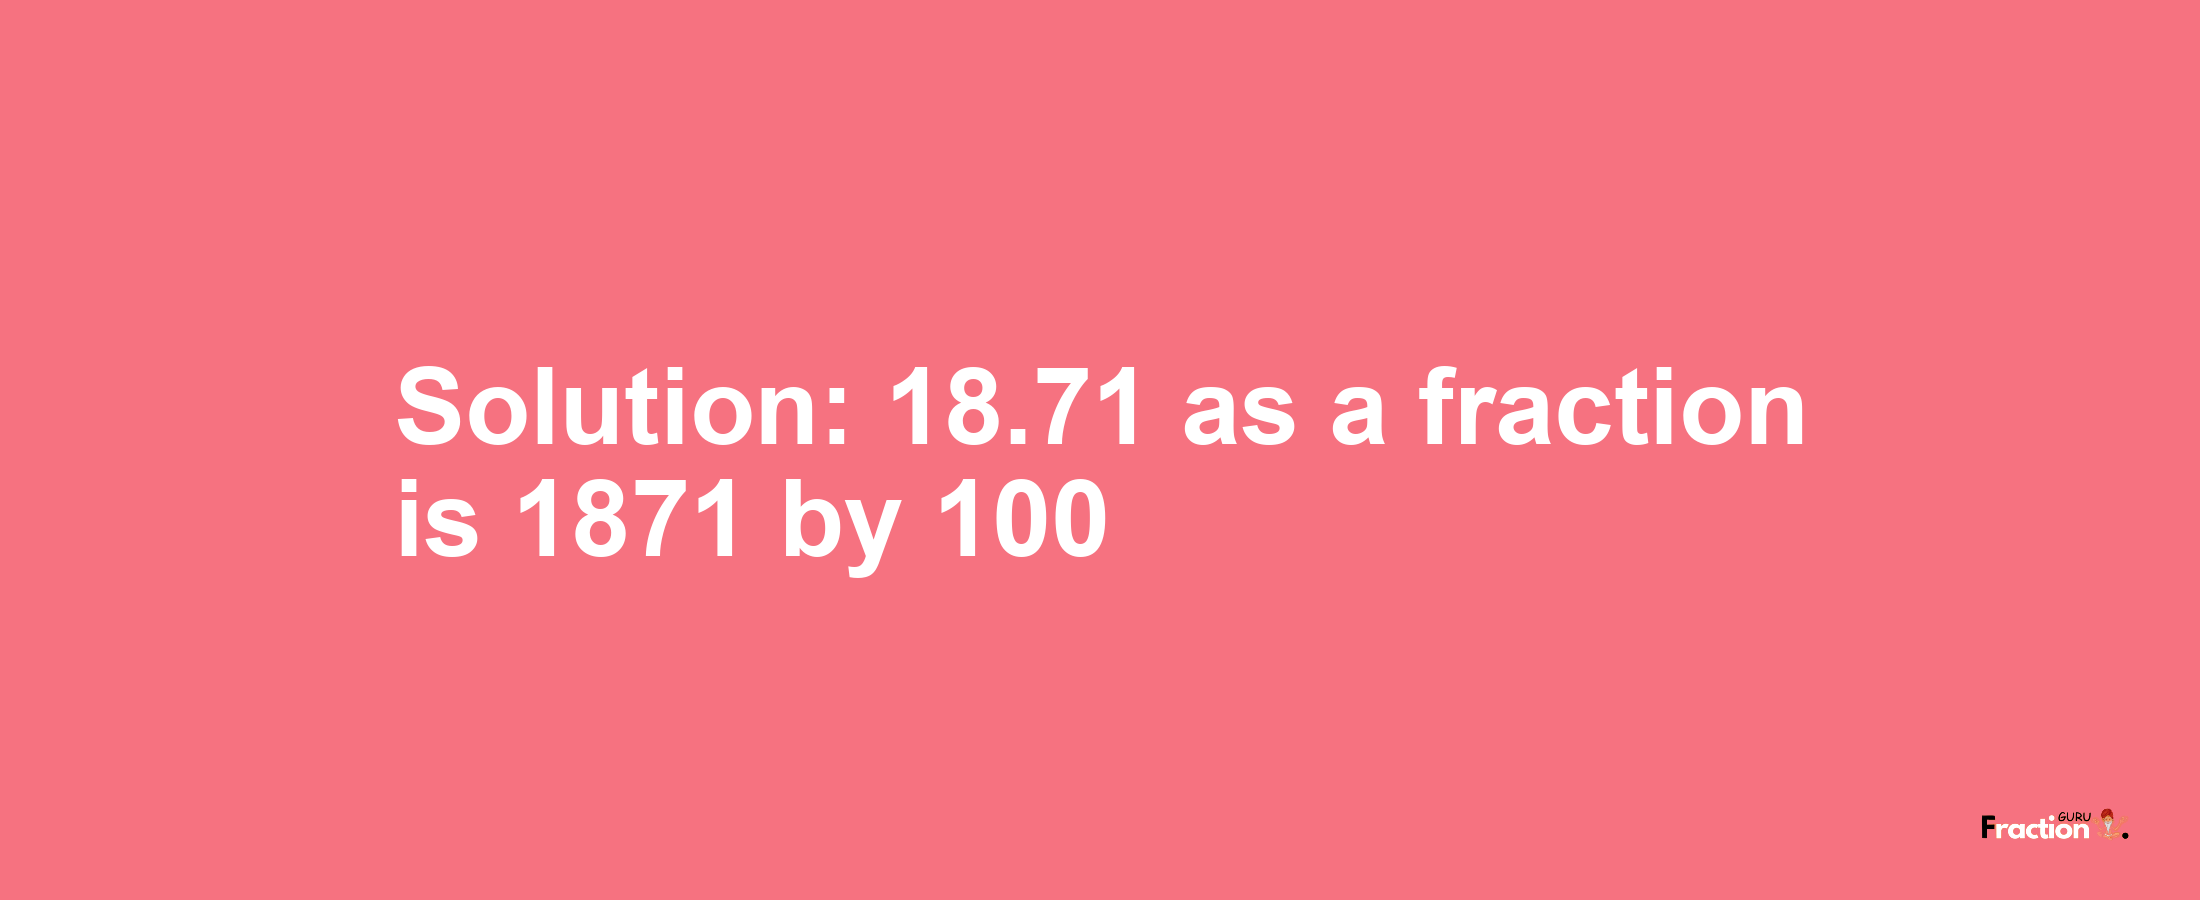 Solution:18.71 as a fraction is 1871/100